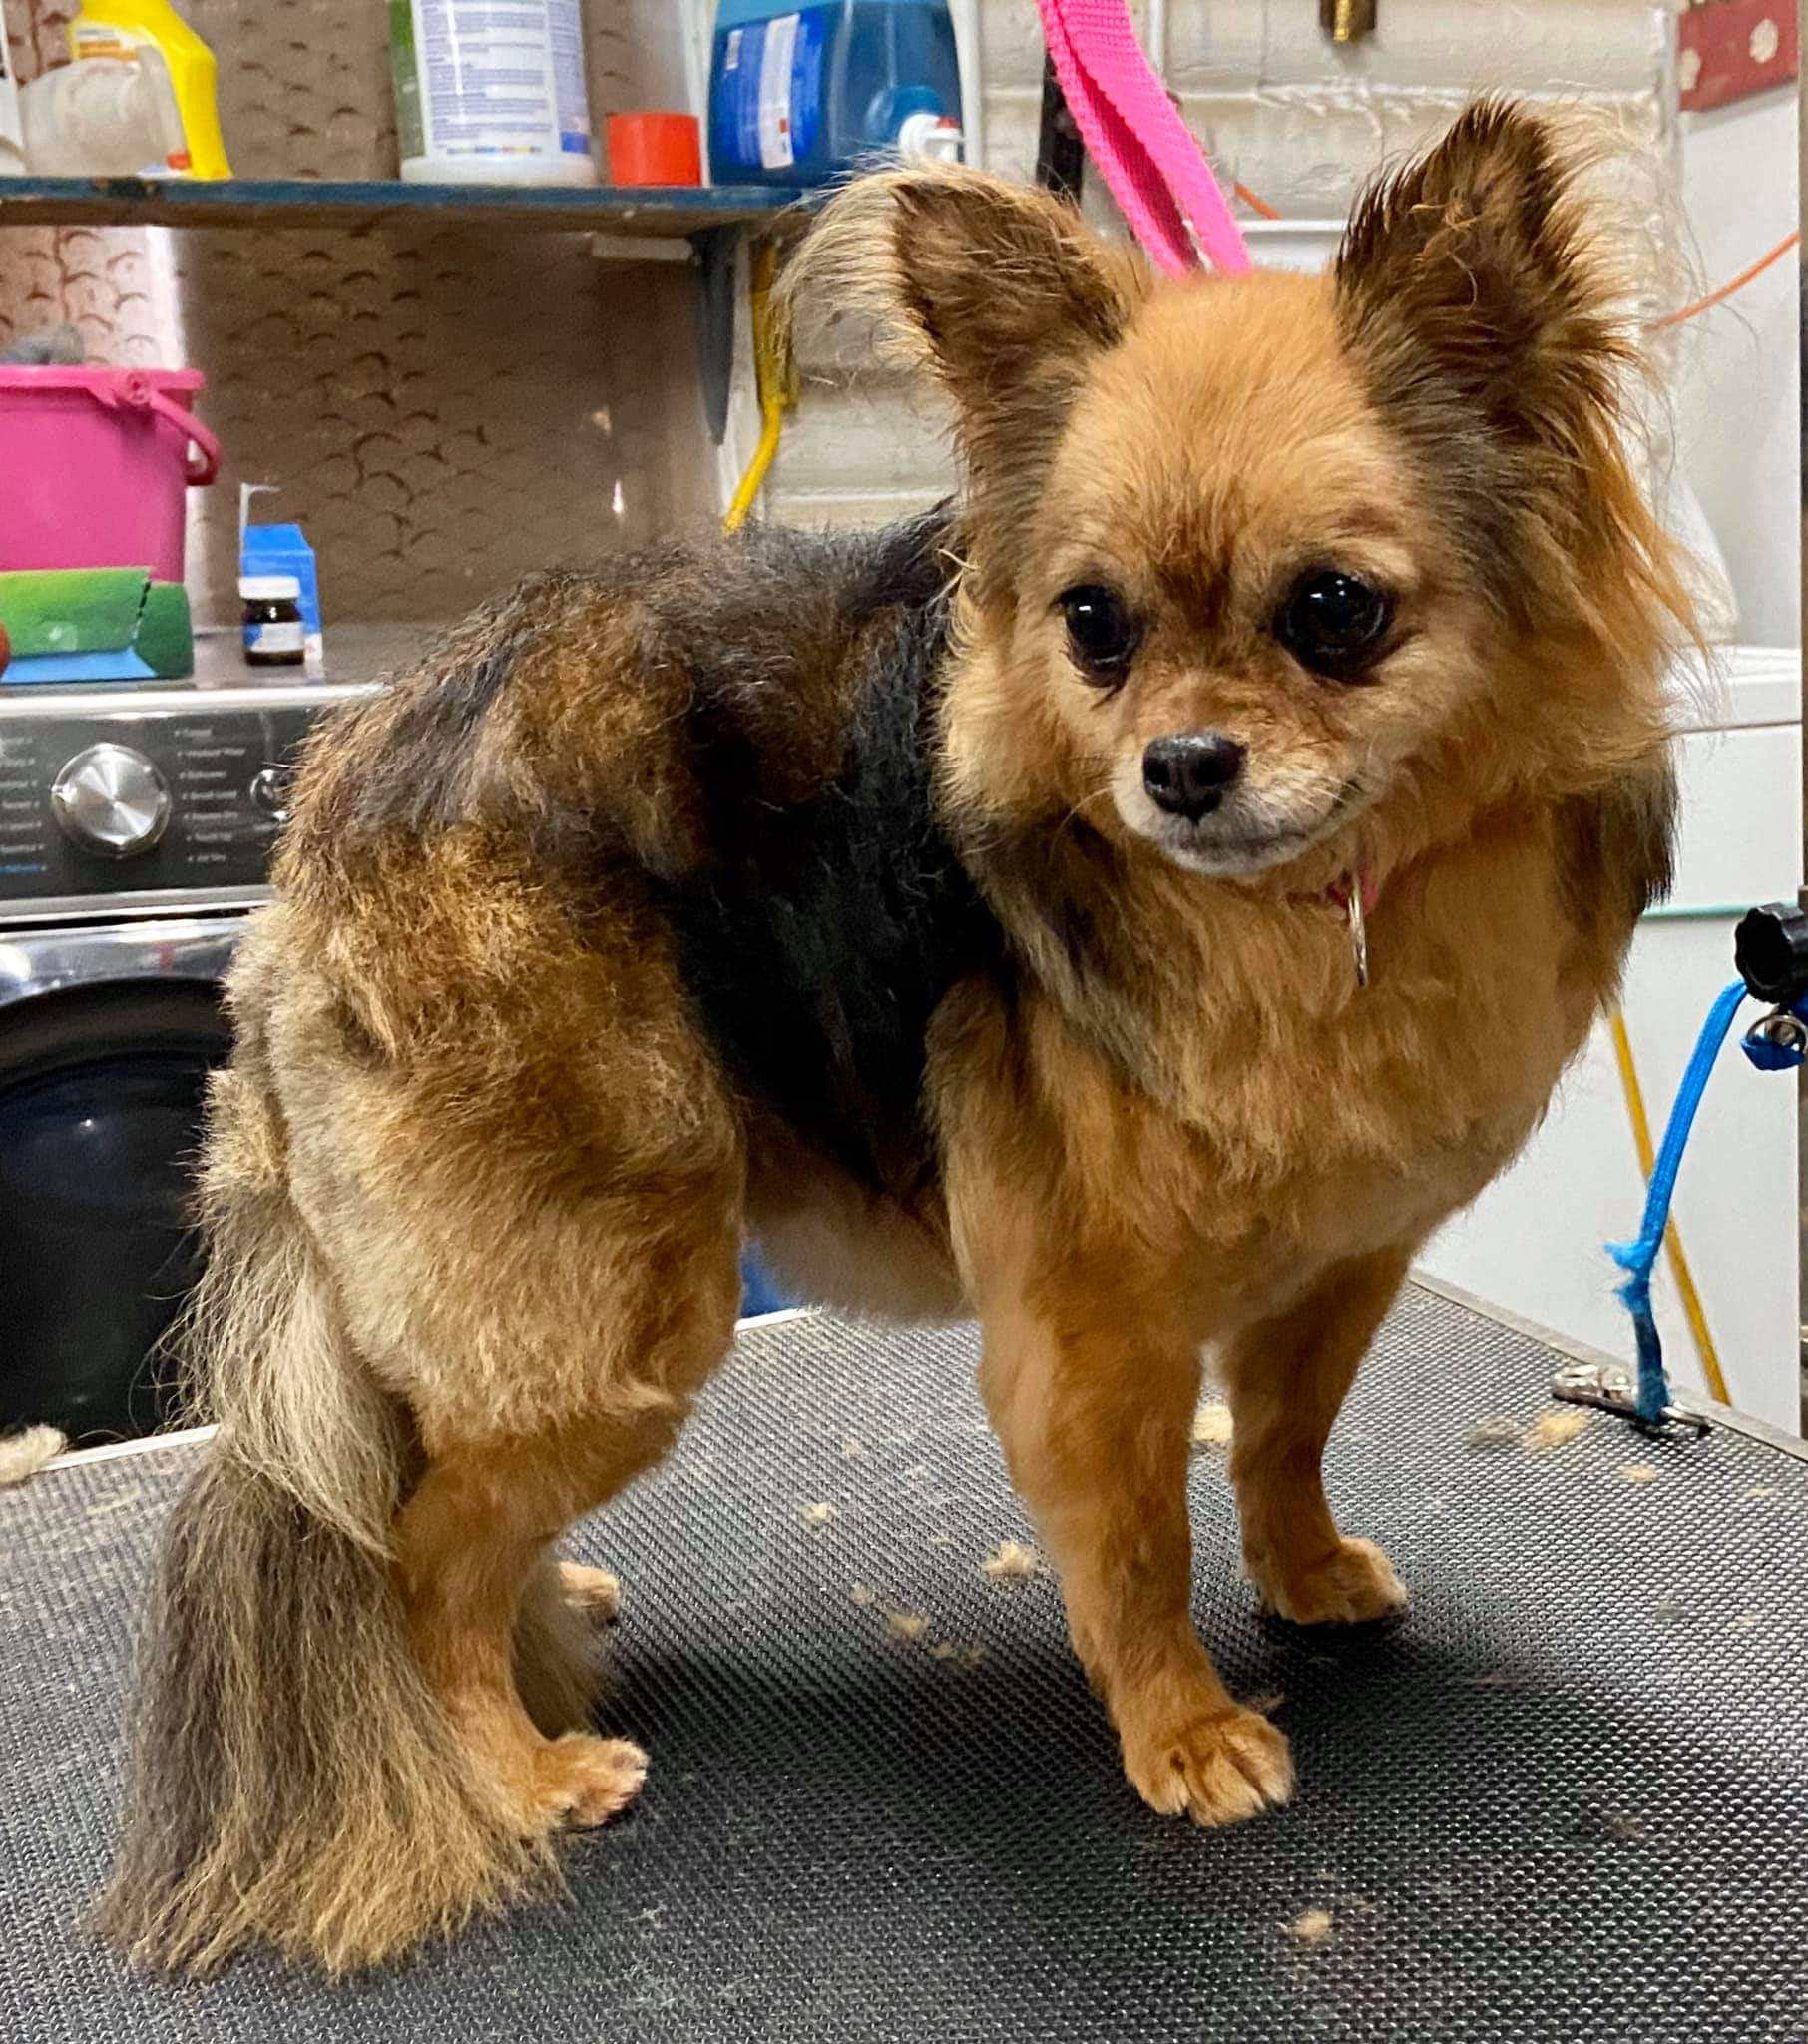 Pomeranian groomed by student at mastergroomersacademy.com